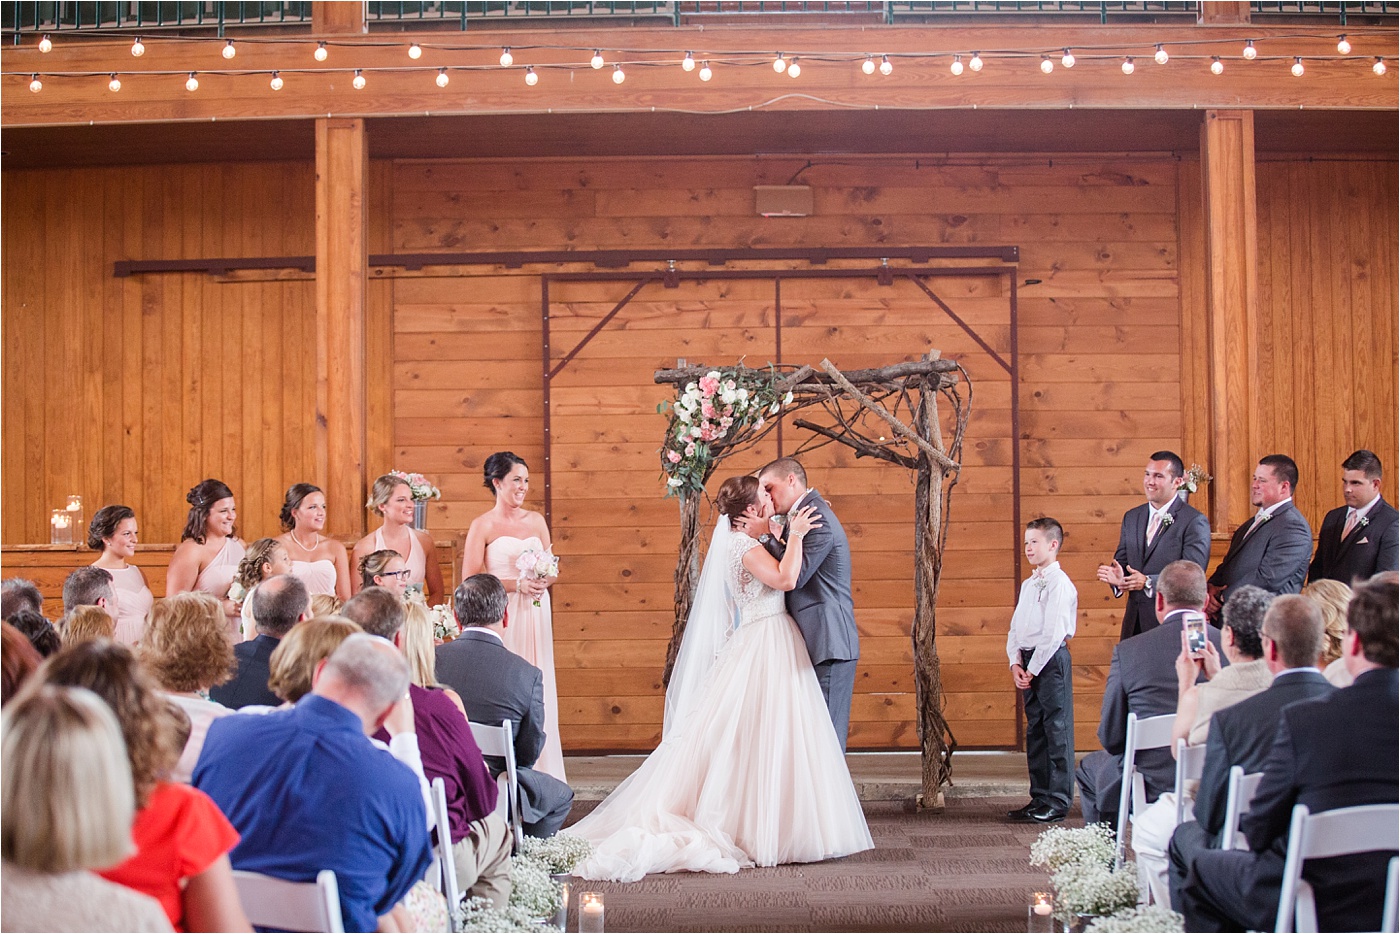 A Blush Outdoor wedding at Irongate Equestrian | KariMe Photography_0094